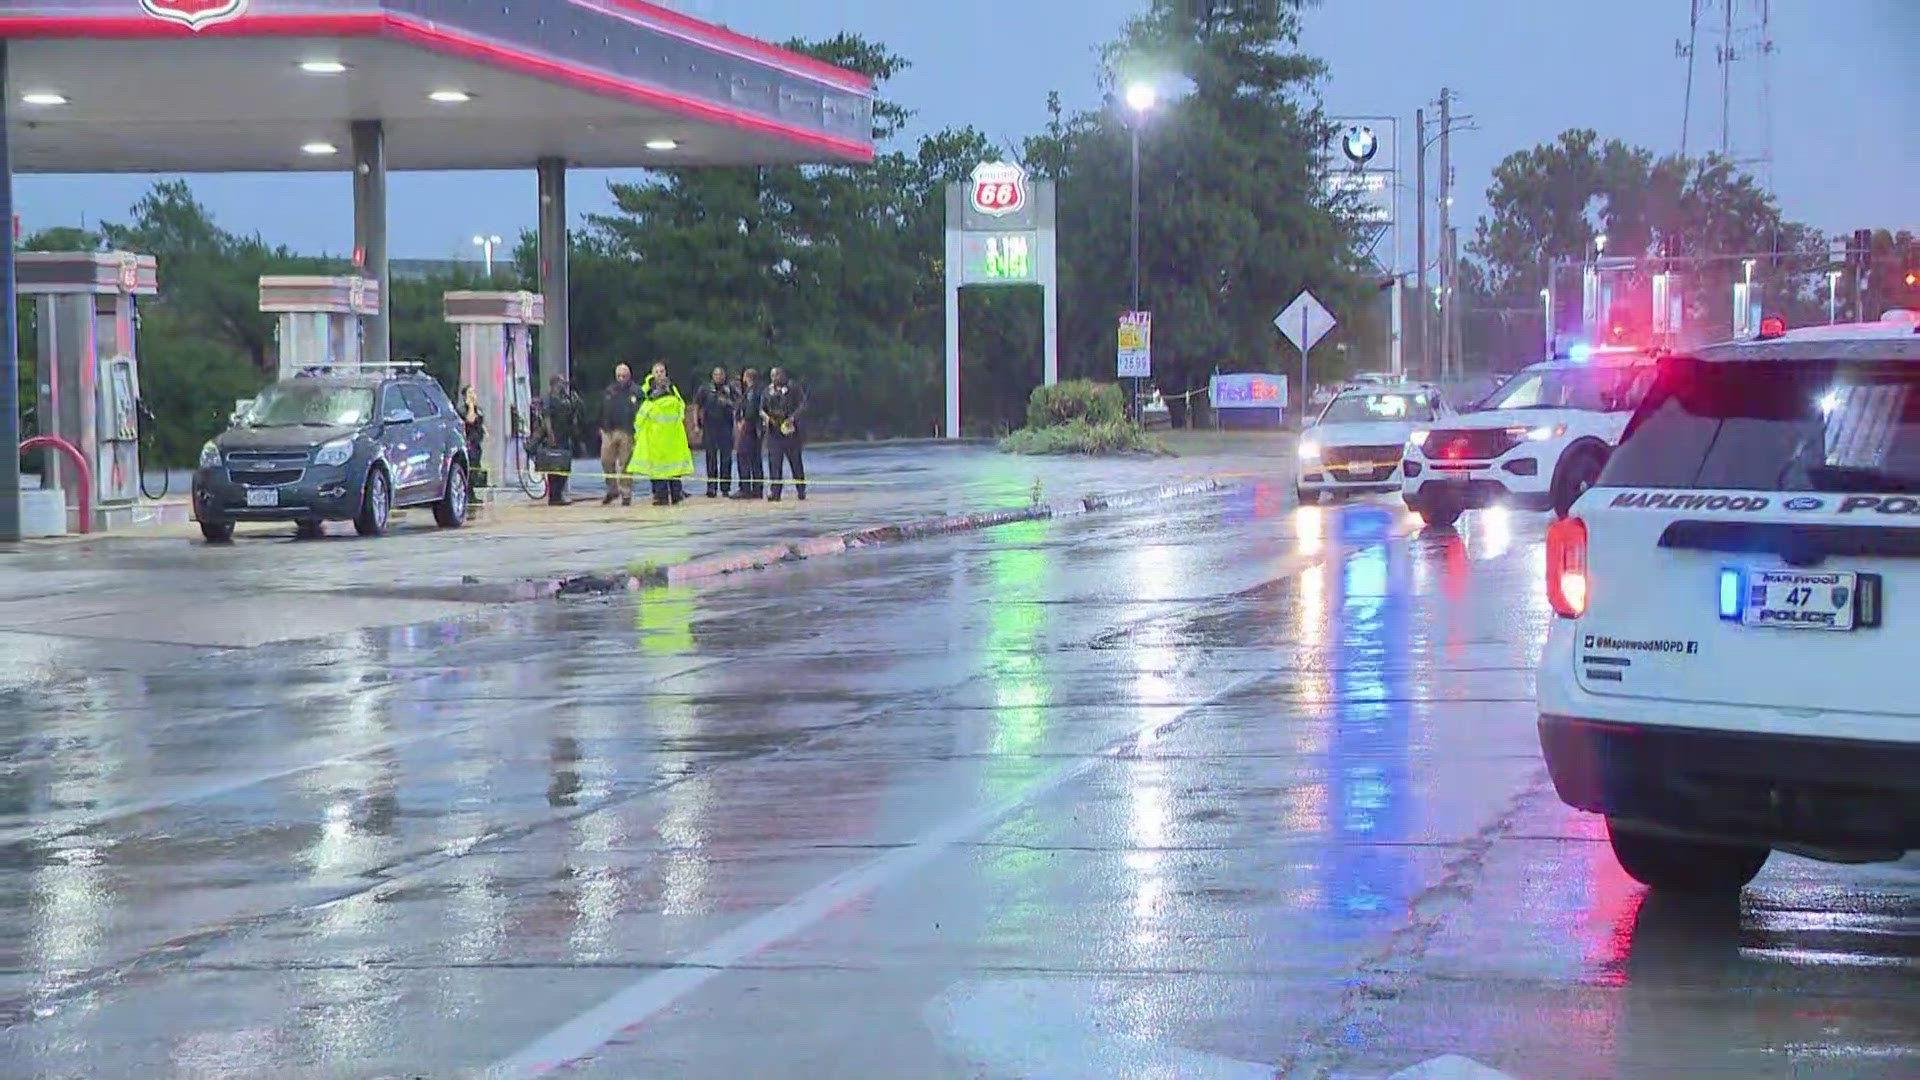 A pedestrian was struck and killed early Wednesday morning in Maplewood. The driver remained at the scene of the crash.